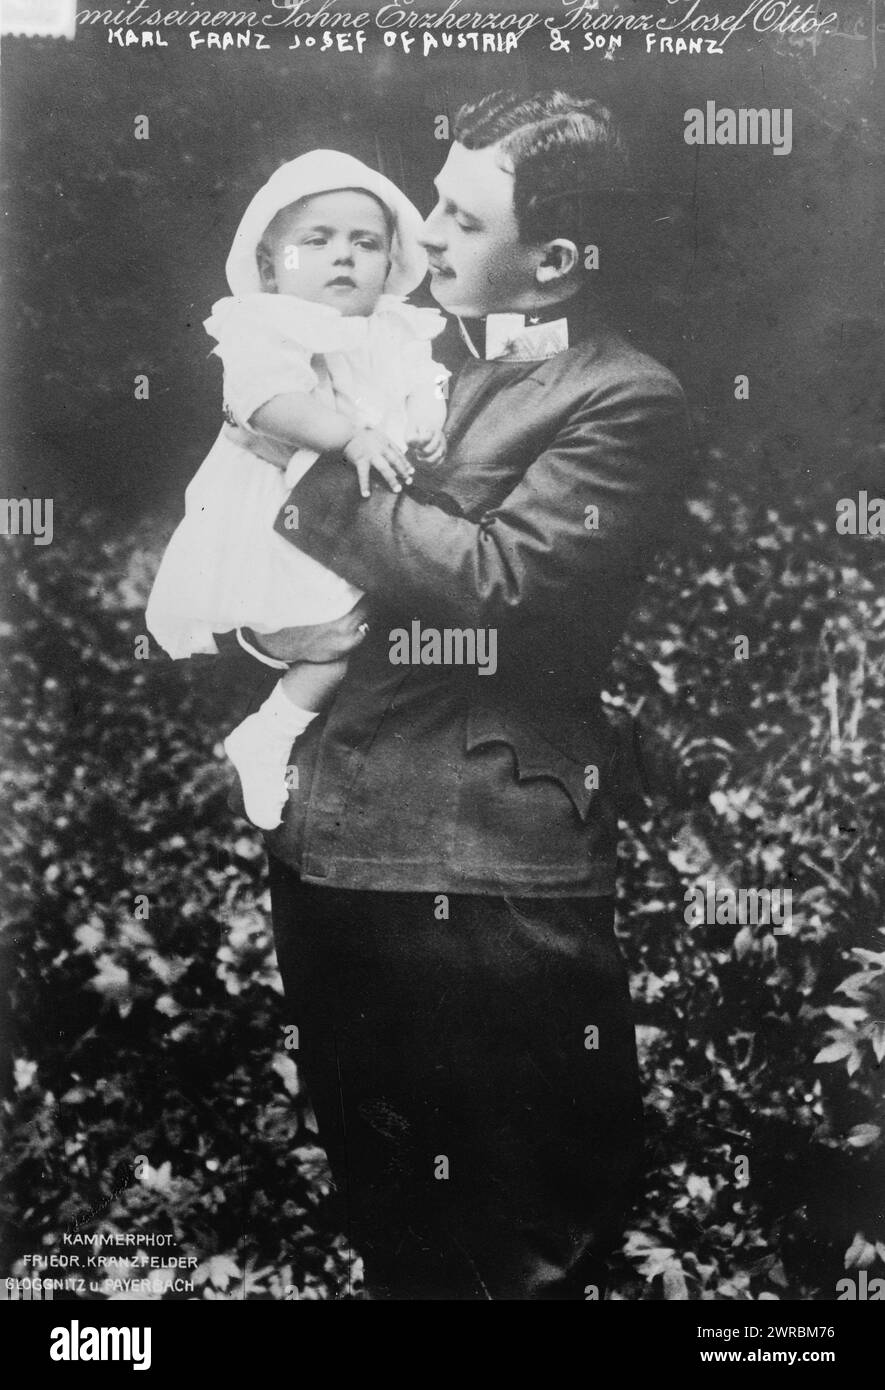 Karl Franz Josef of Austria & son Franz, Photograph shows Charles I of Austria (Charles IV of Hungary) (1887-1922) the last ruler of the Austro-Hungarian Empire with his son Franz., 1914 June 26, Glass negatives, 1 negative: glass Stock Photo